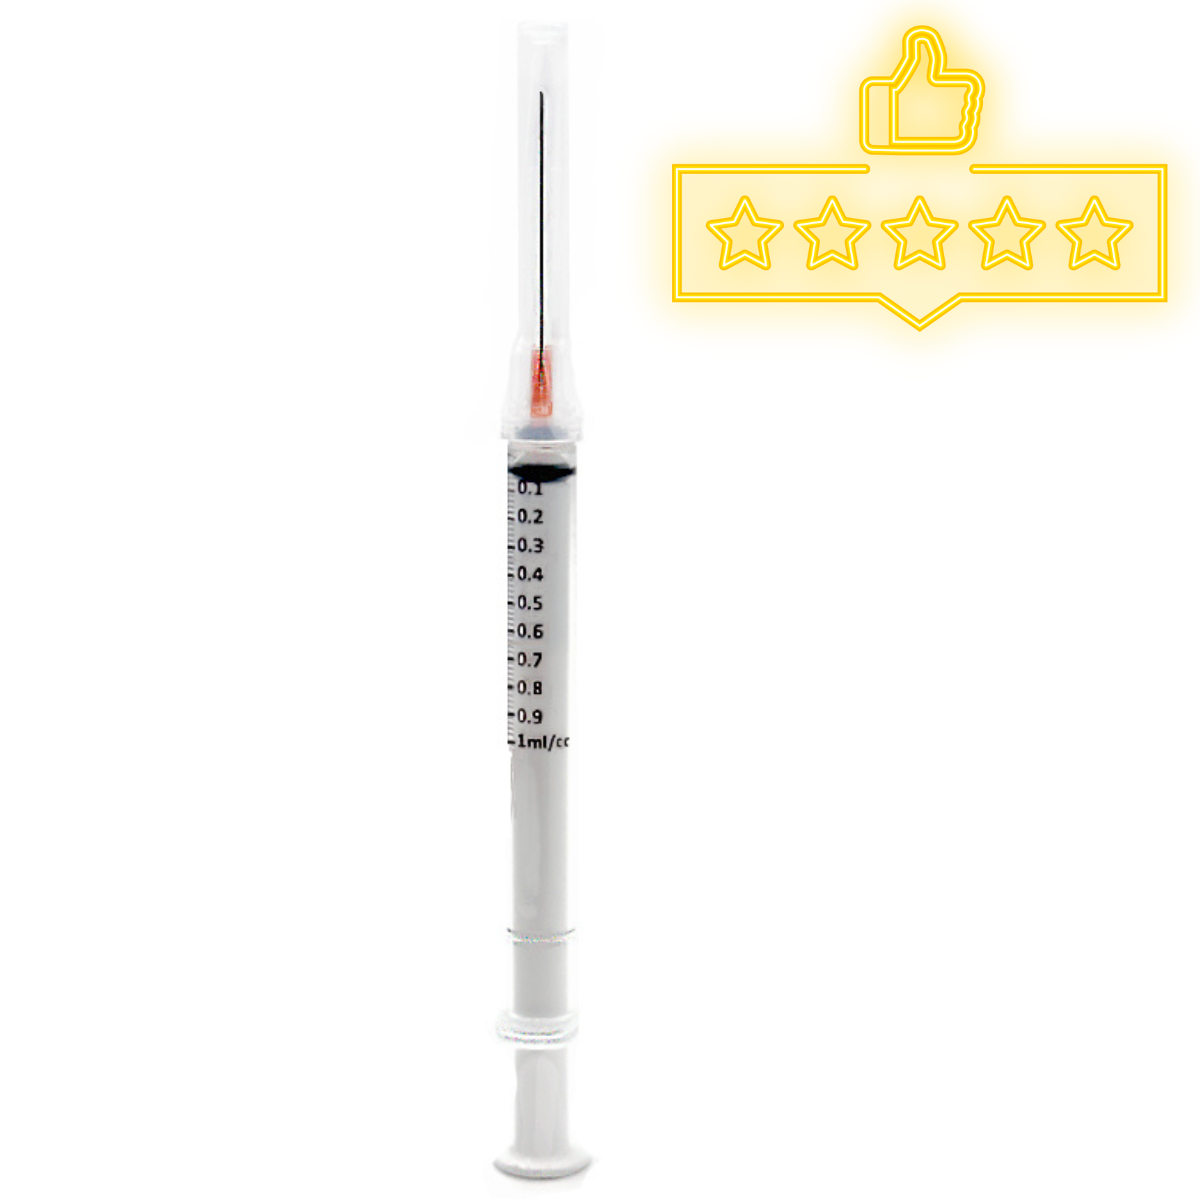 Sterile 1ml, 25 Gauge Syringe with attached Needle (50pk)